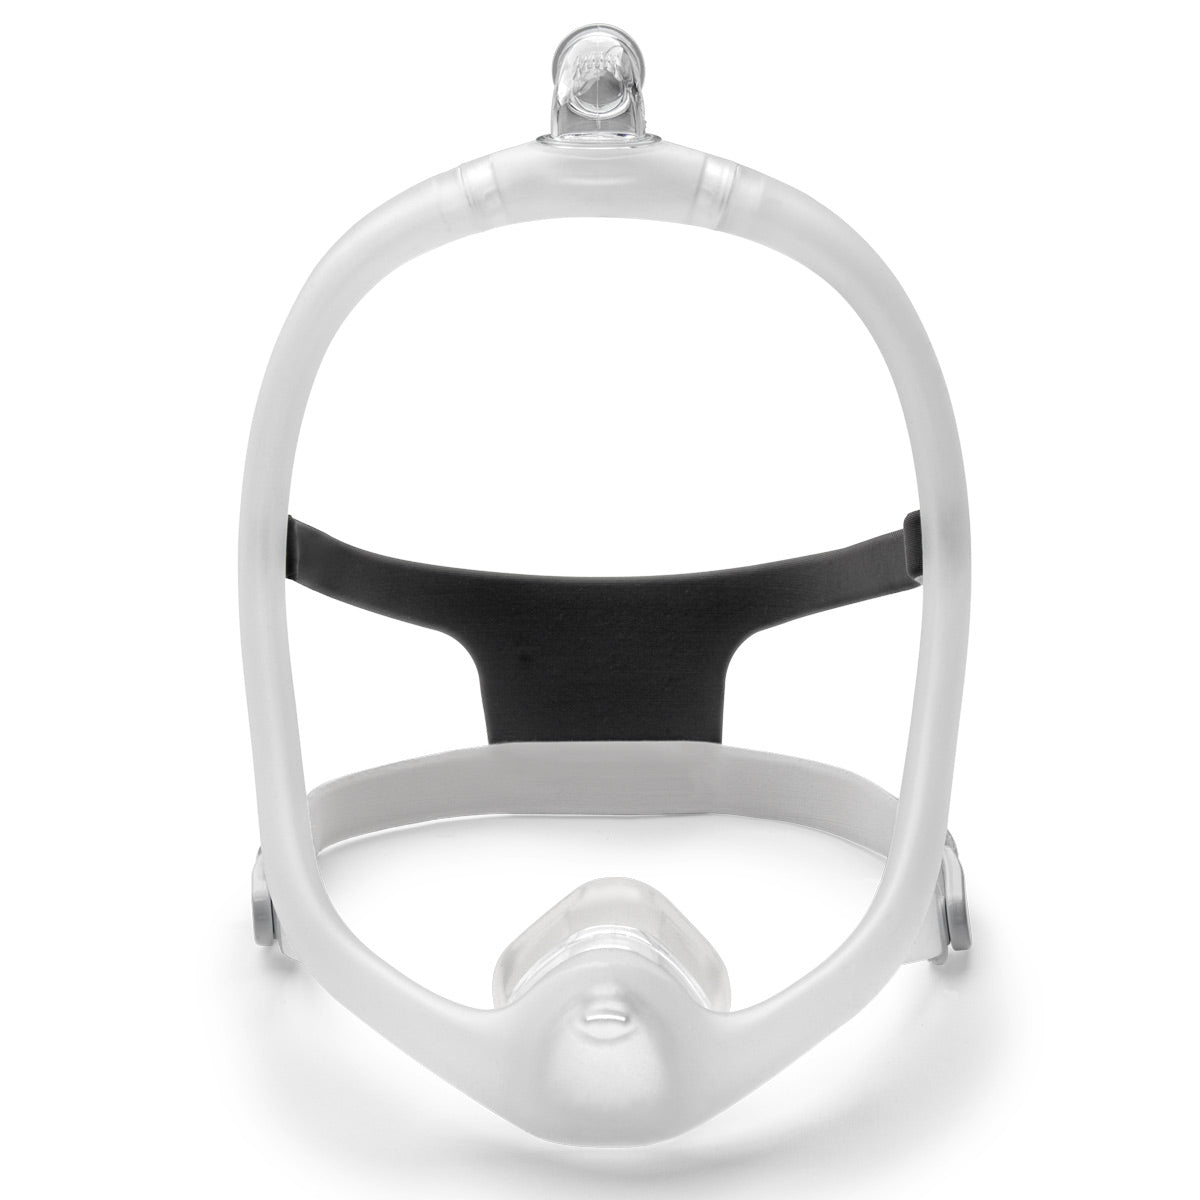 Top Selling CPAP Masks of 2022 (So Far)